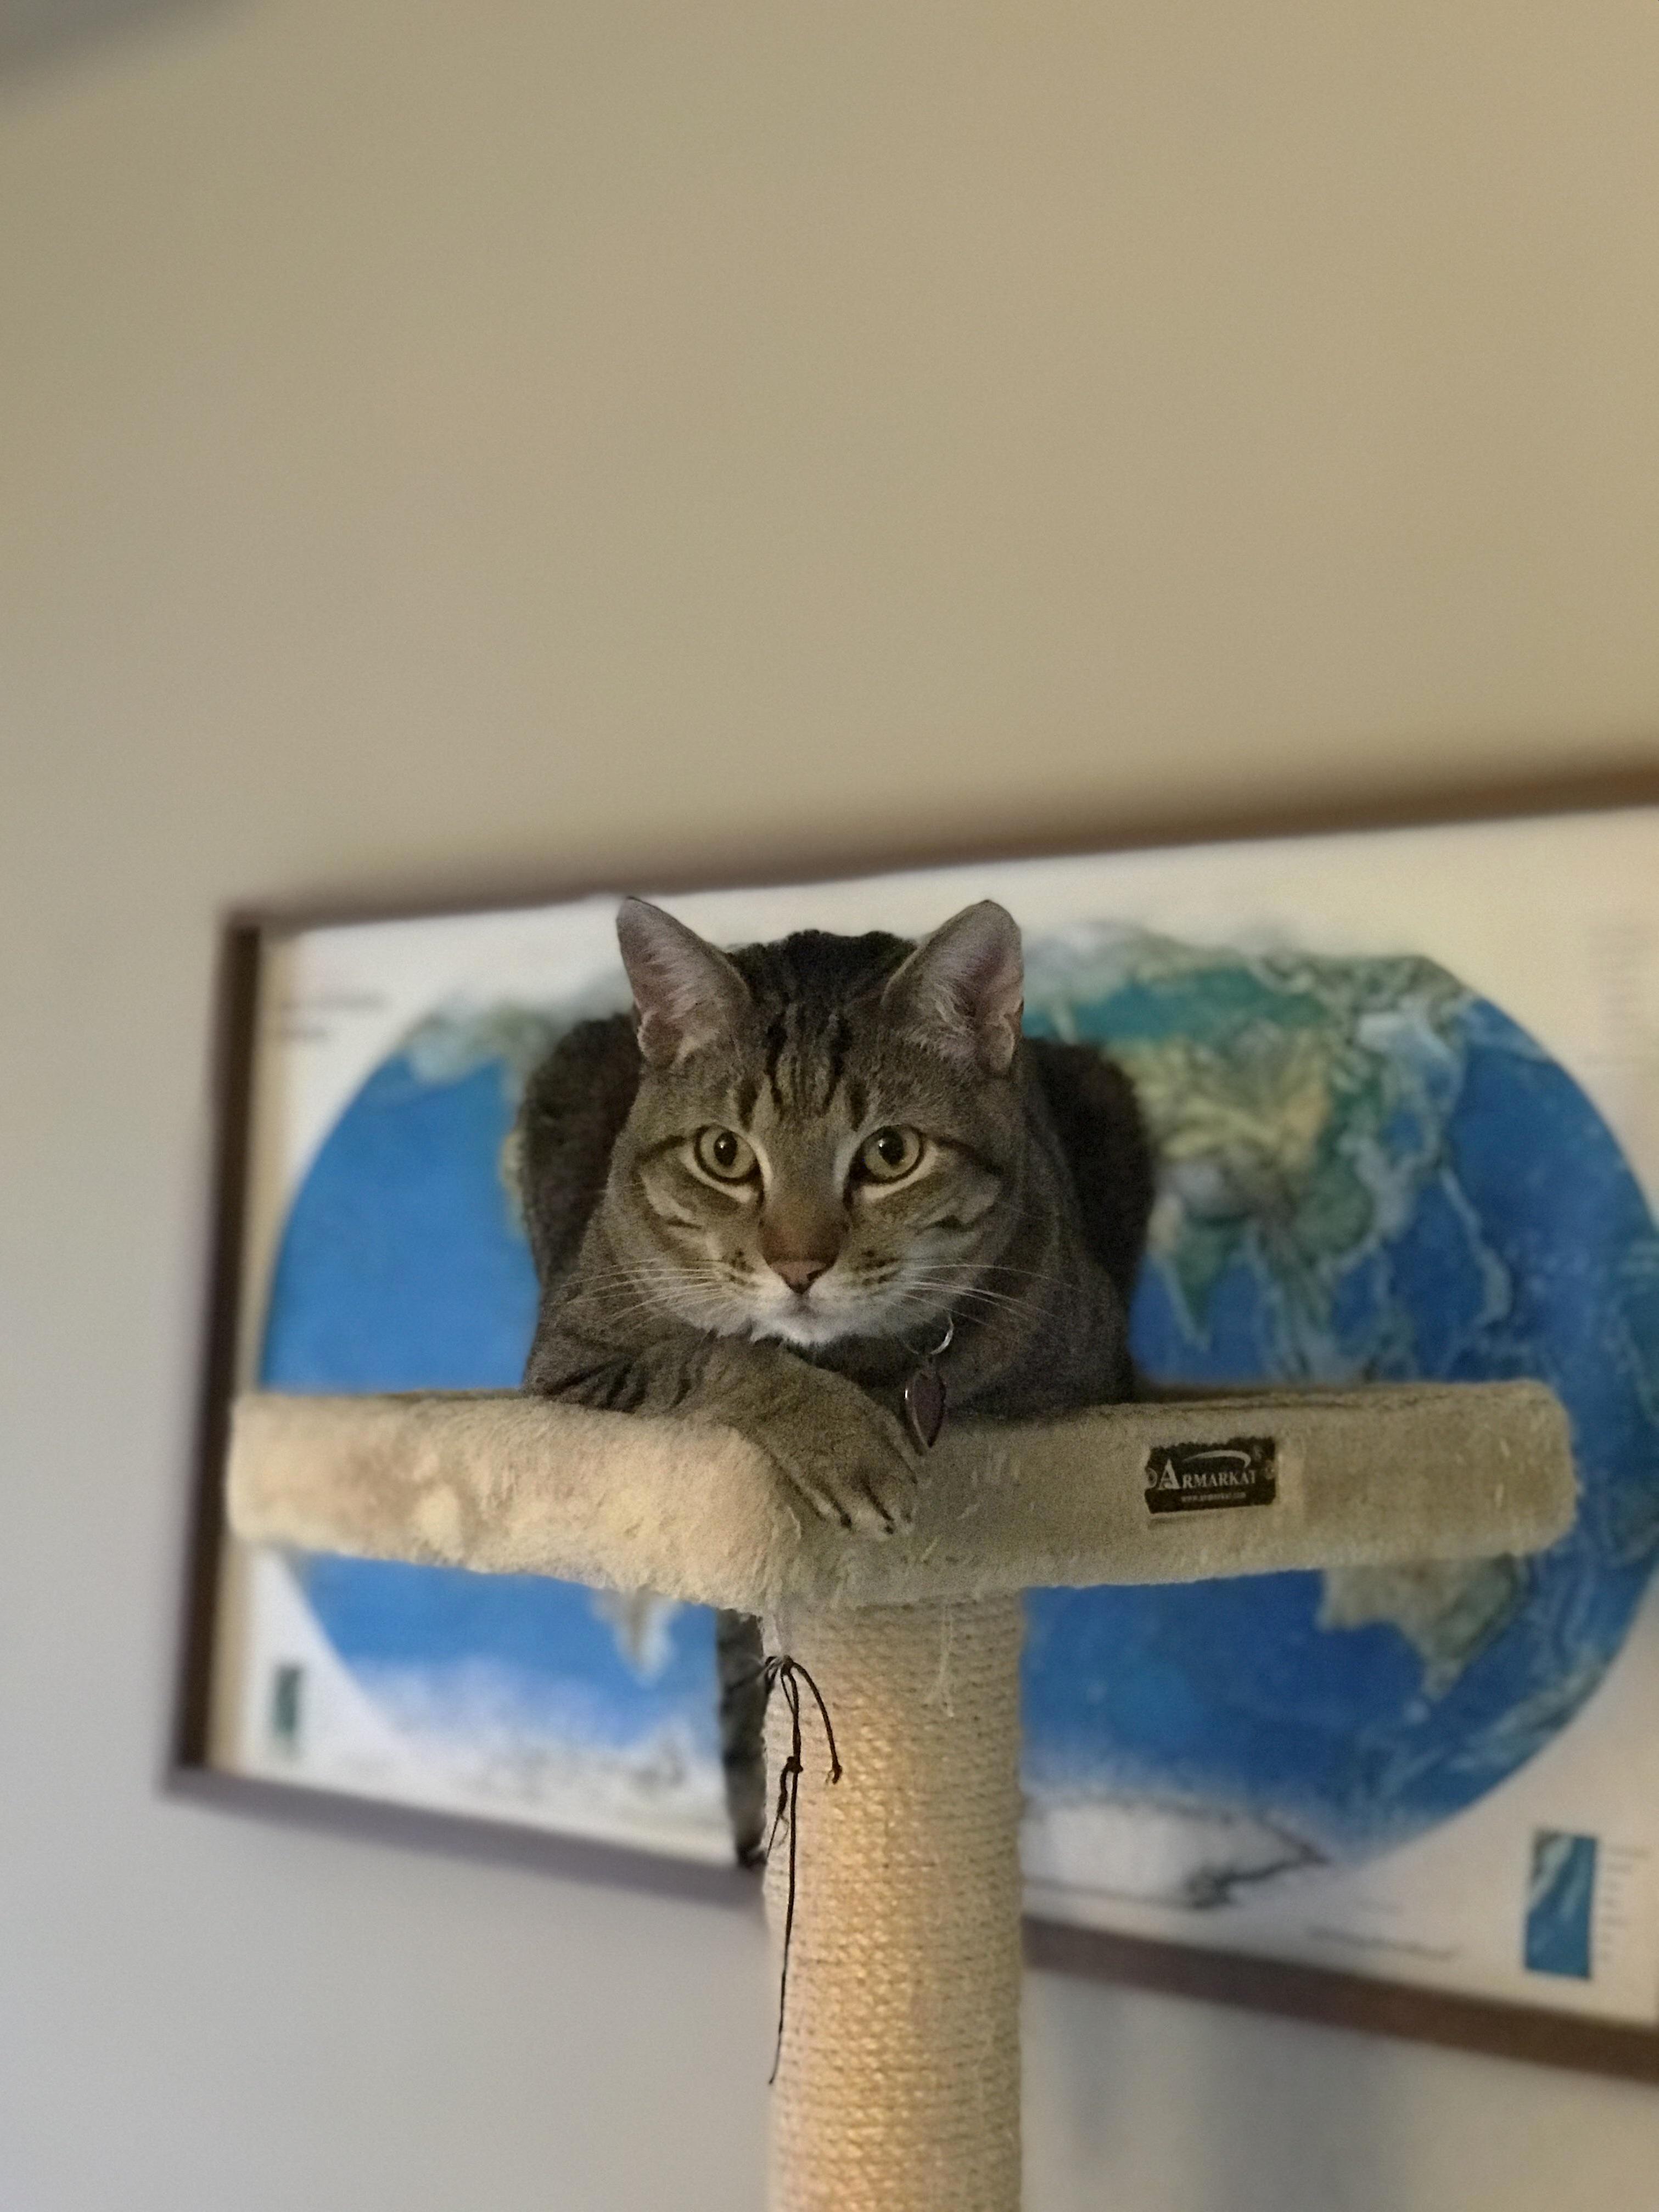 Meatball. king of the world.